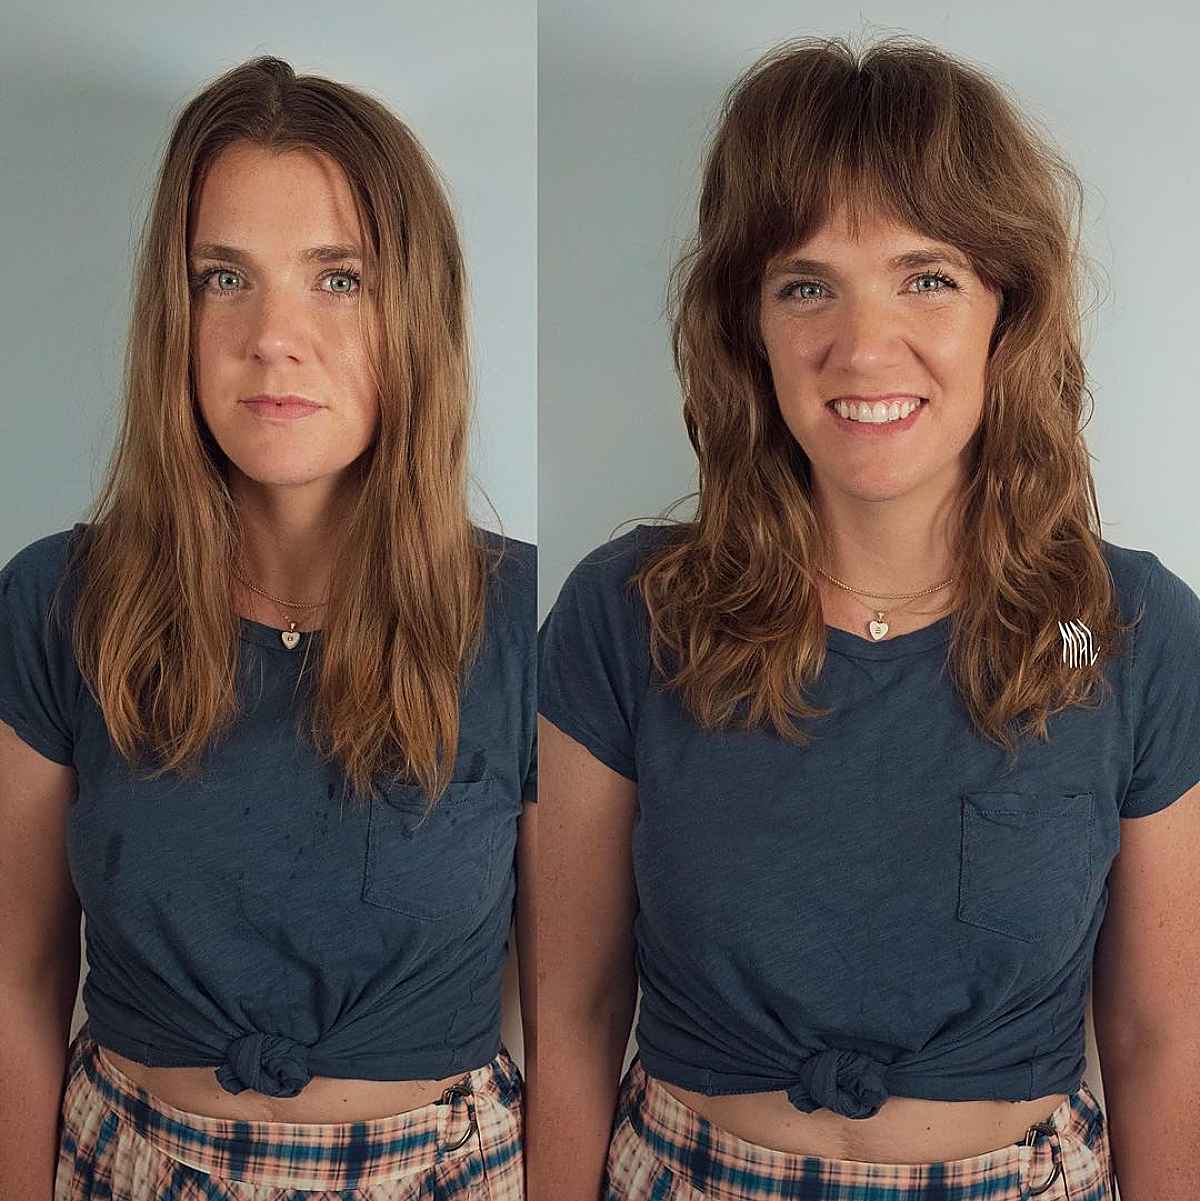 Sweet Low-Maintenance Shaggy Hair with Curtain Bangs